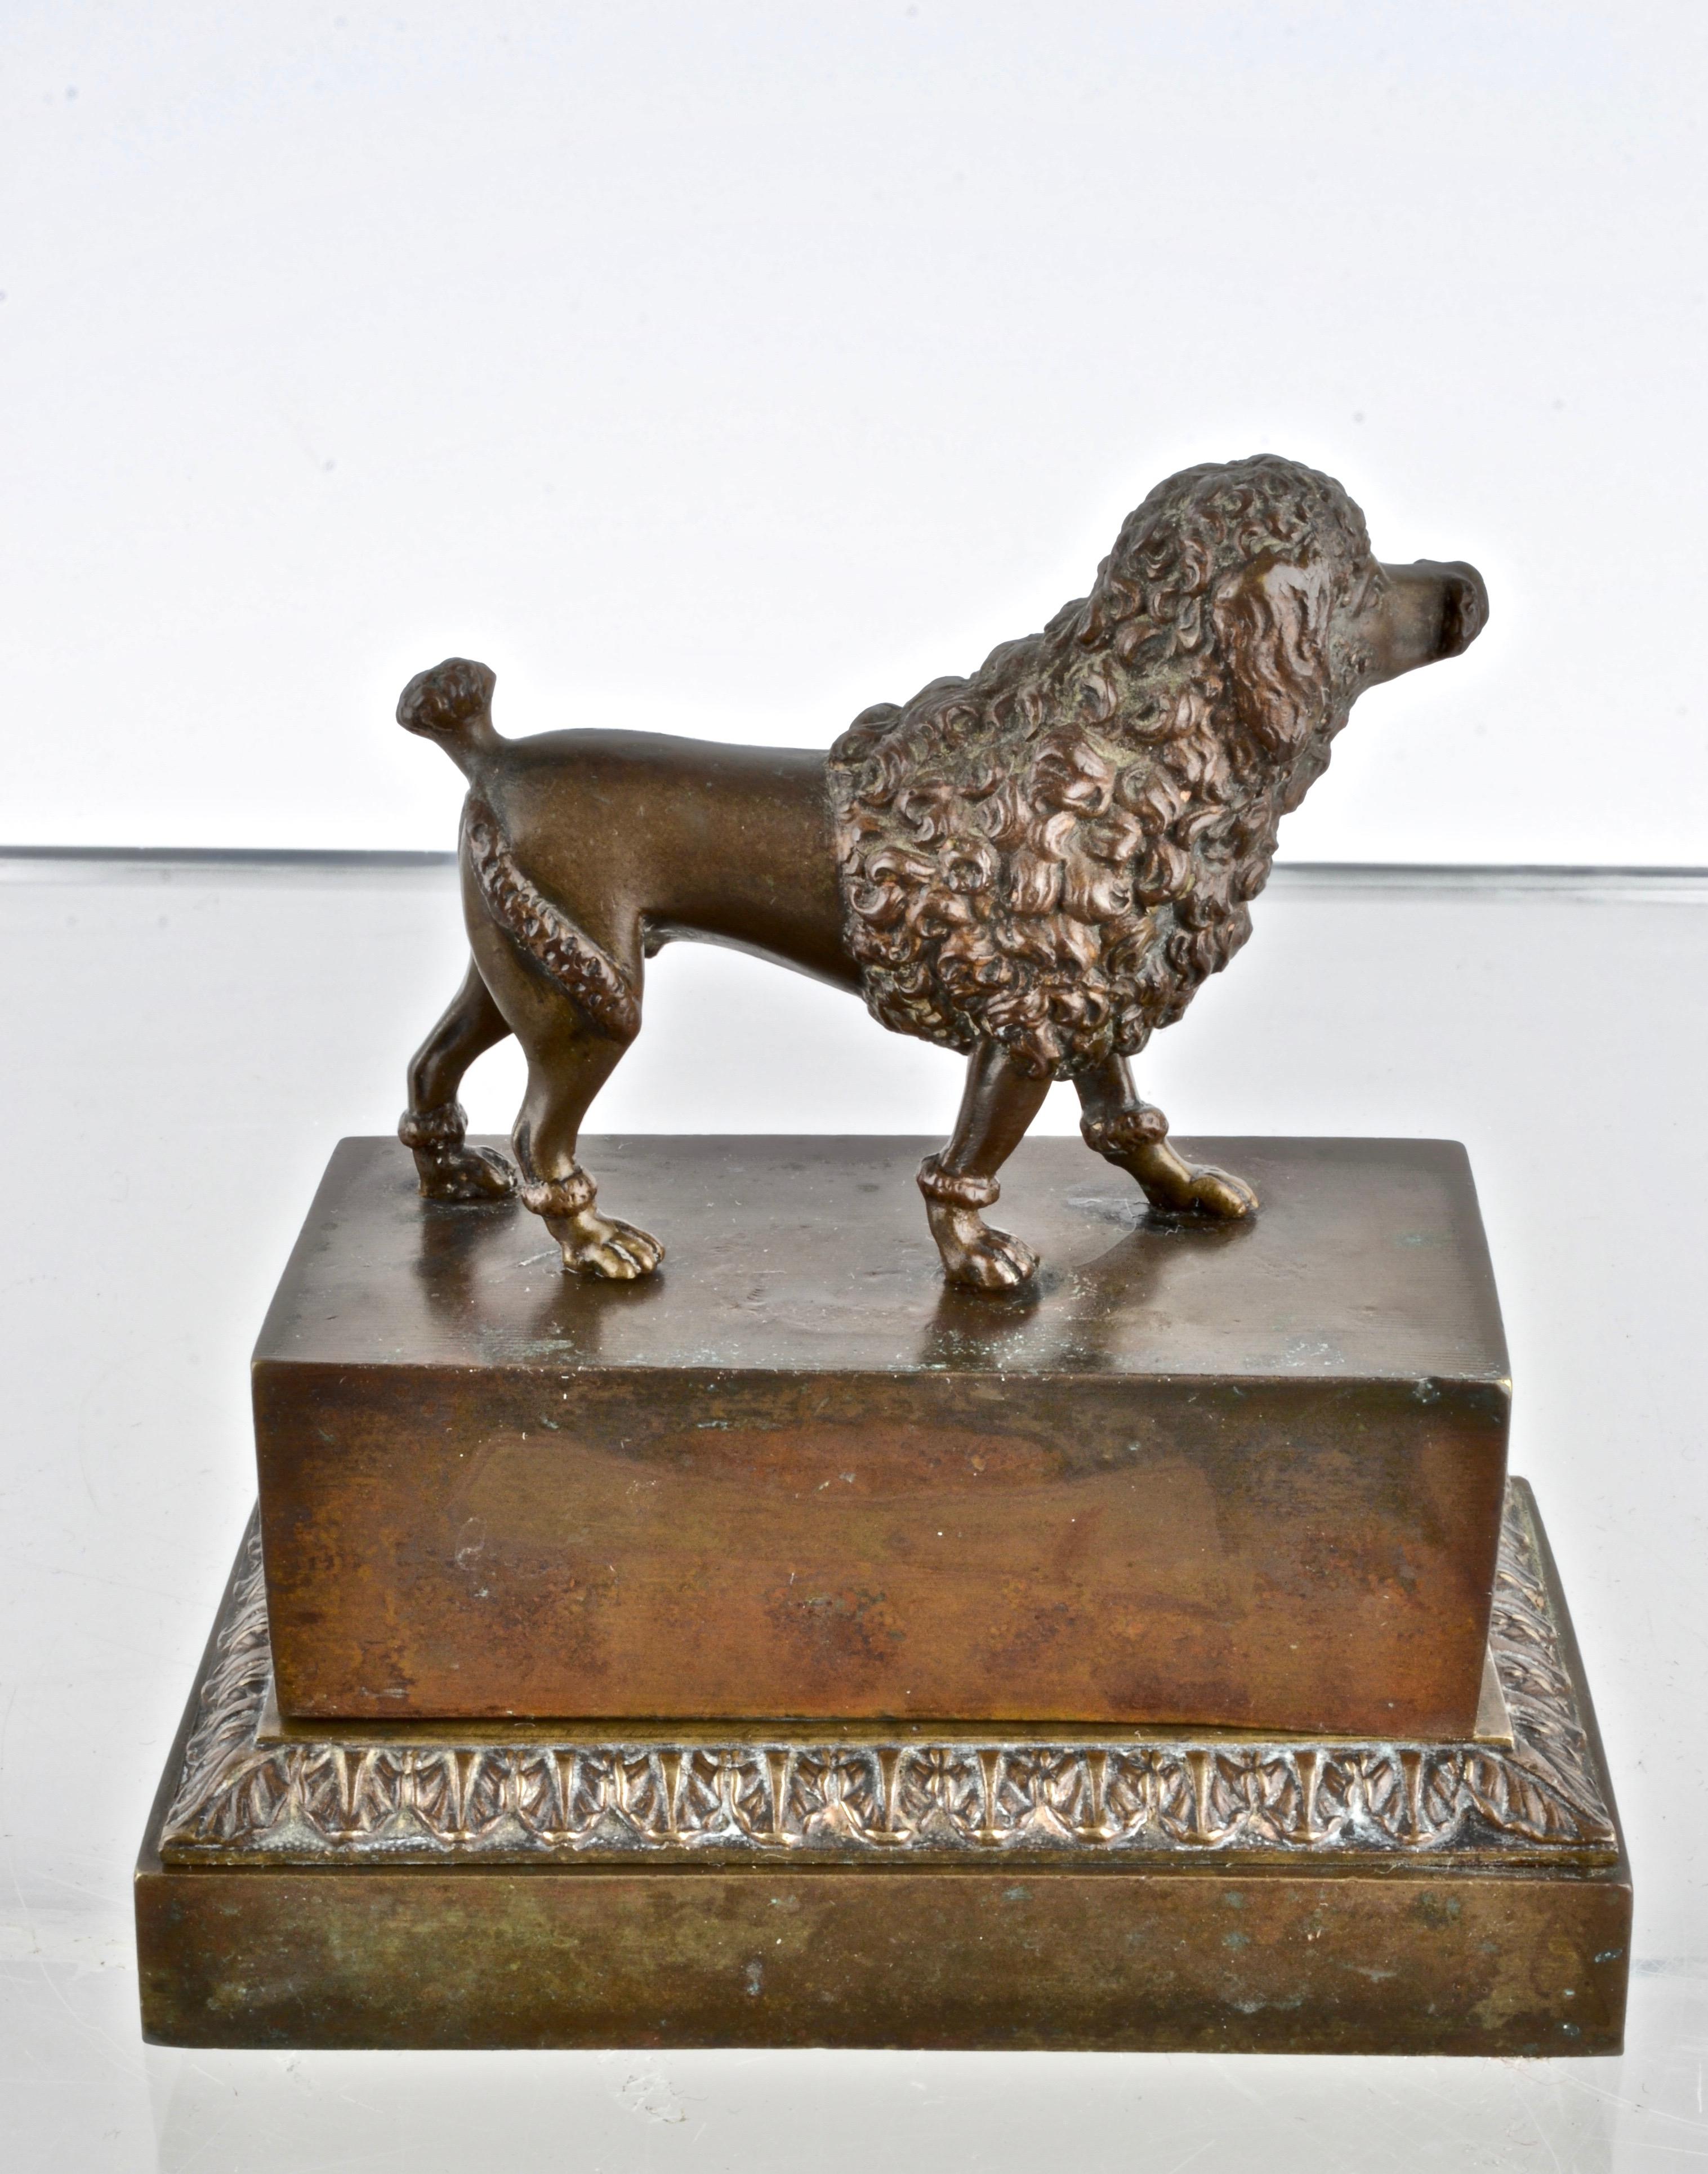 A detailed figure of a standard poodle stands on this antique inkwell. All bronze with wood bottom. Interior holes for inkwells. No inserts. Acanthus leaf detail around base. Finely cast. Antique patina.